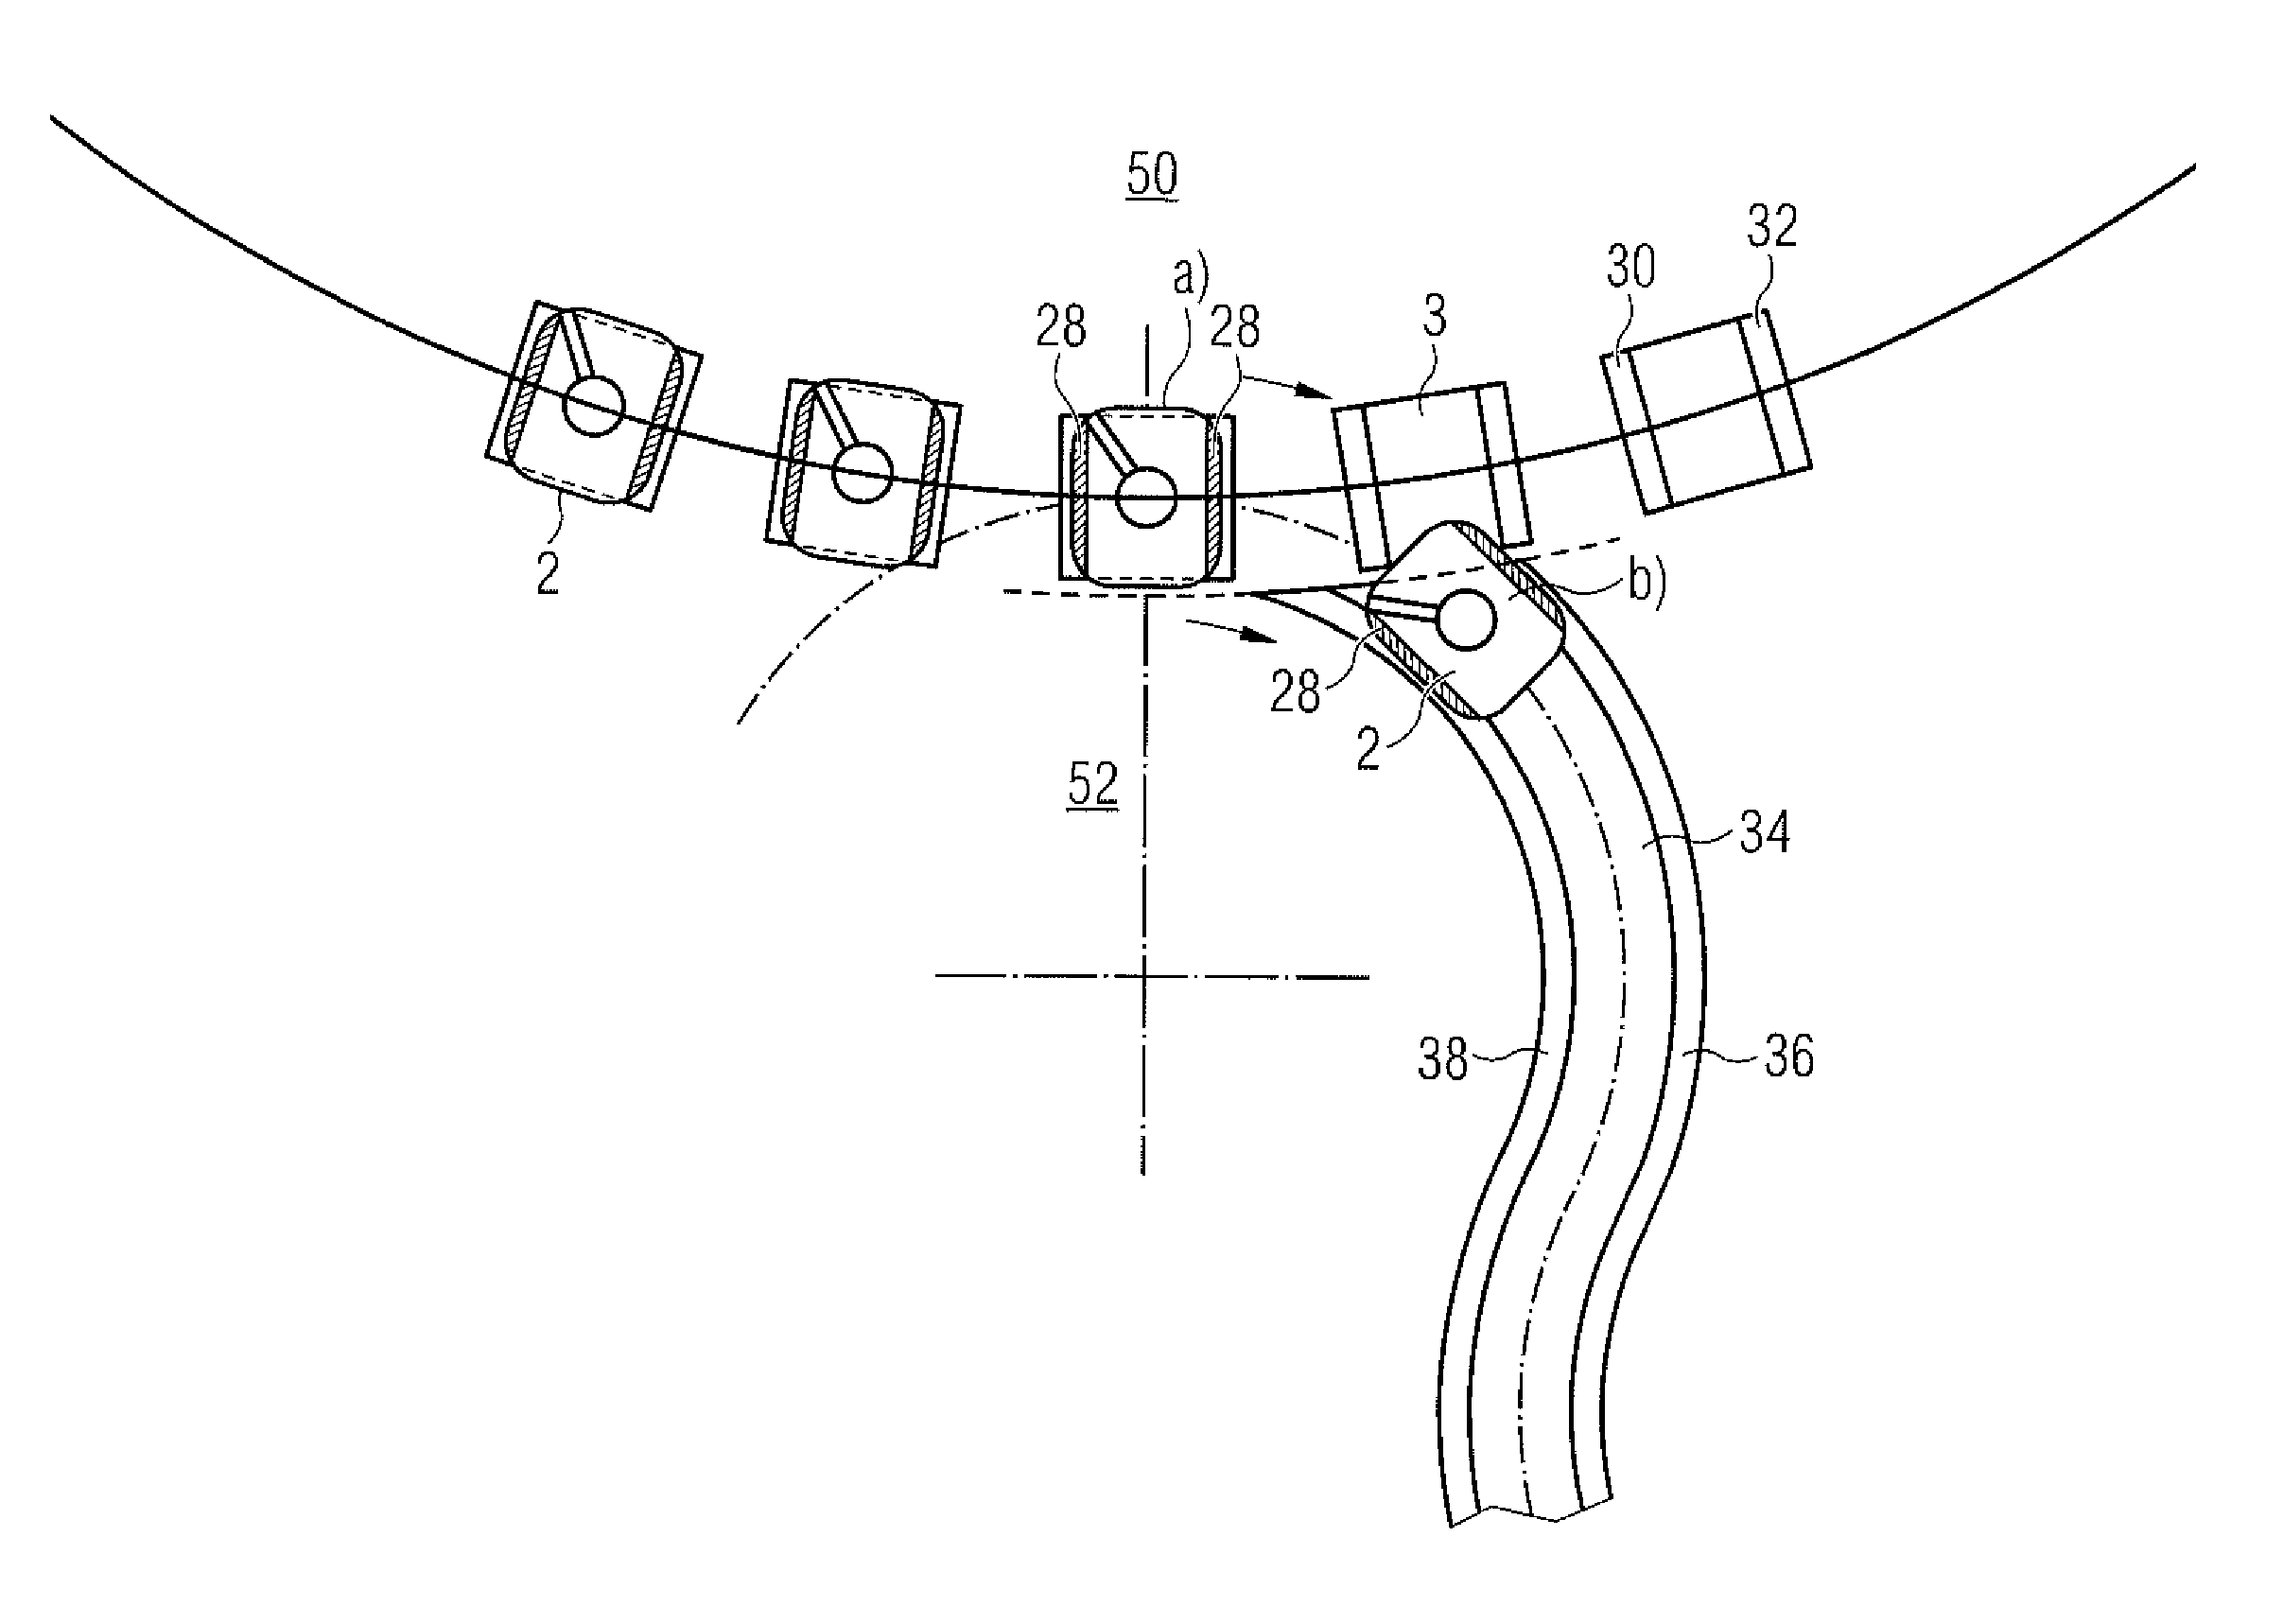 Method and device for transporting containers filled with fluid